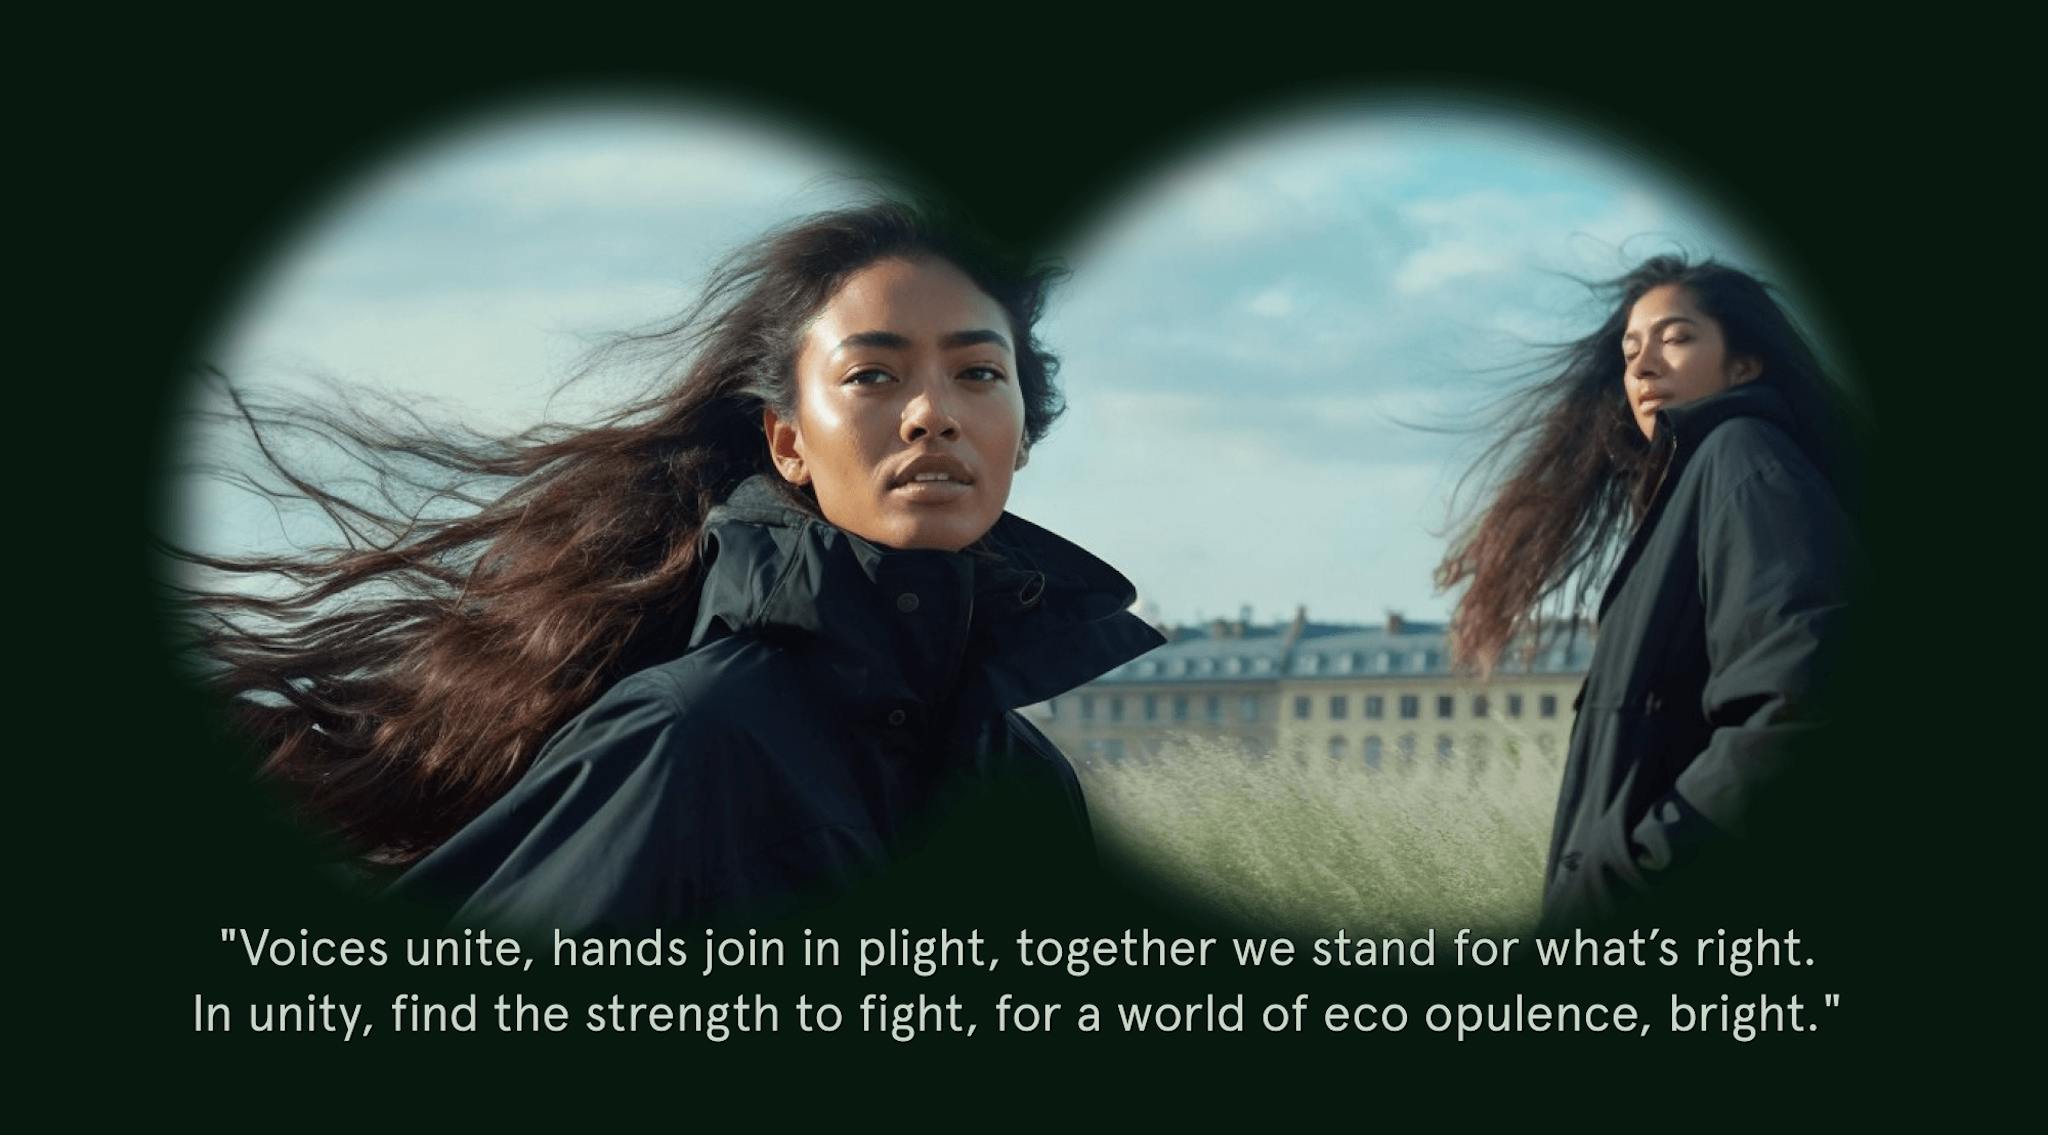 Two people with long, wind-swept hair, standing against a city backdrop, viewed through a binocular vignette with a quote: "Voices unite, hands join in plight, together we stand for what’s right. In unity, find the strength to fight, for a world of eco opulence, bright."